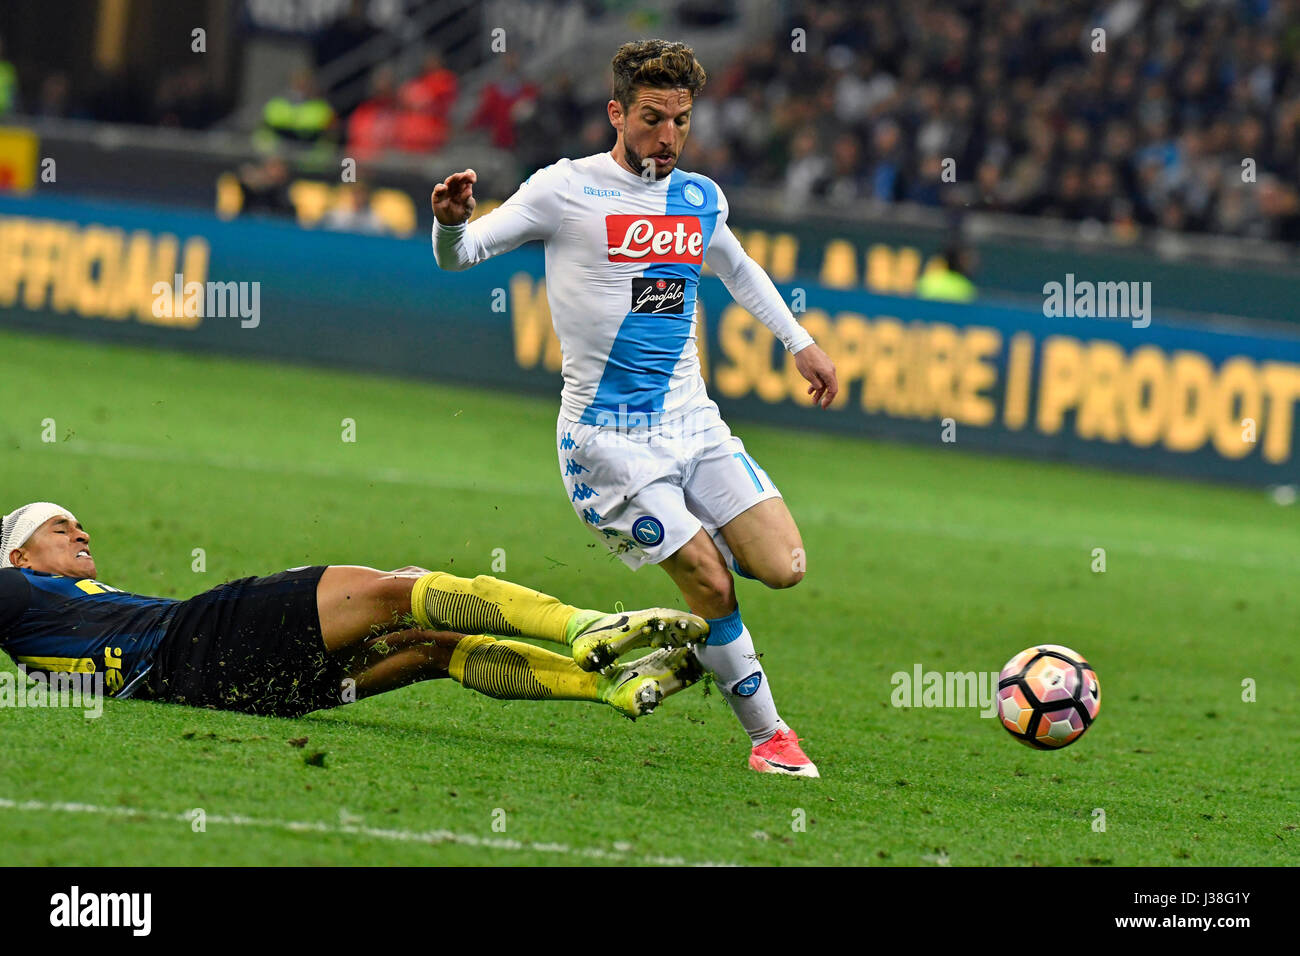 Football players, Drives Meretens and Jeson Murillo, in action at the san siro stadium for the serie A match FC Internazionale vs Napoli, in Milan. Stock Photo